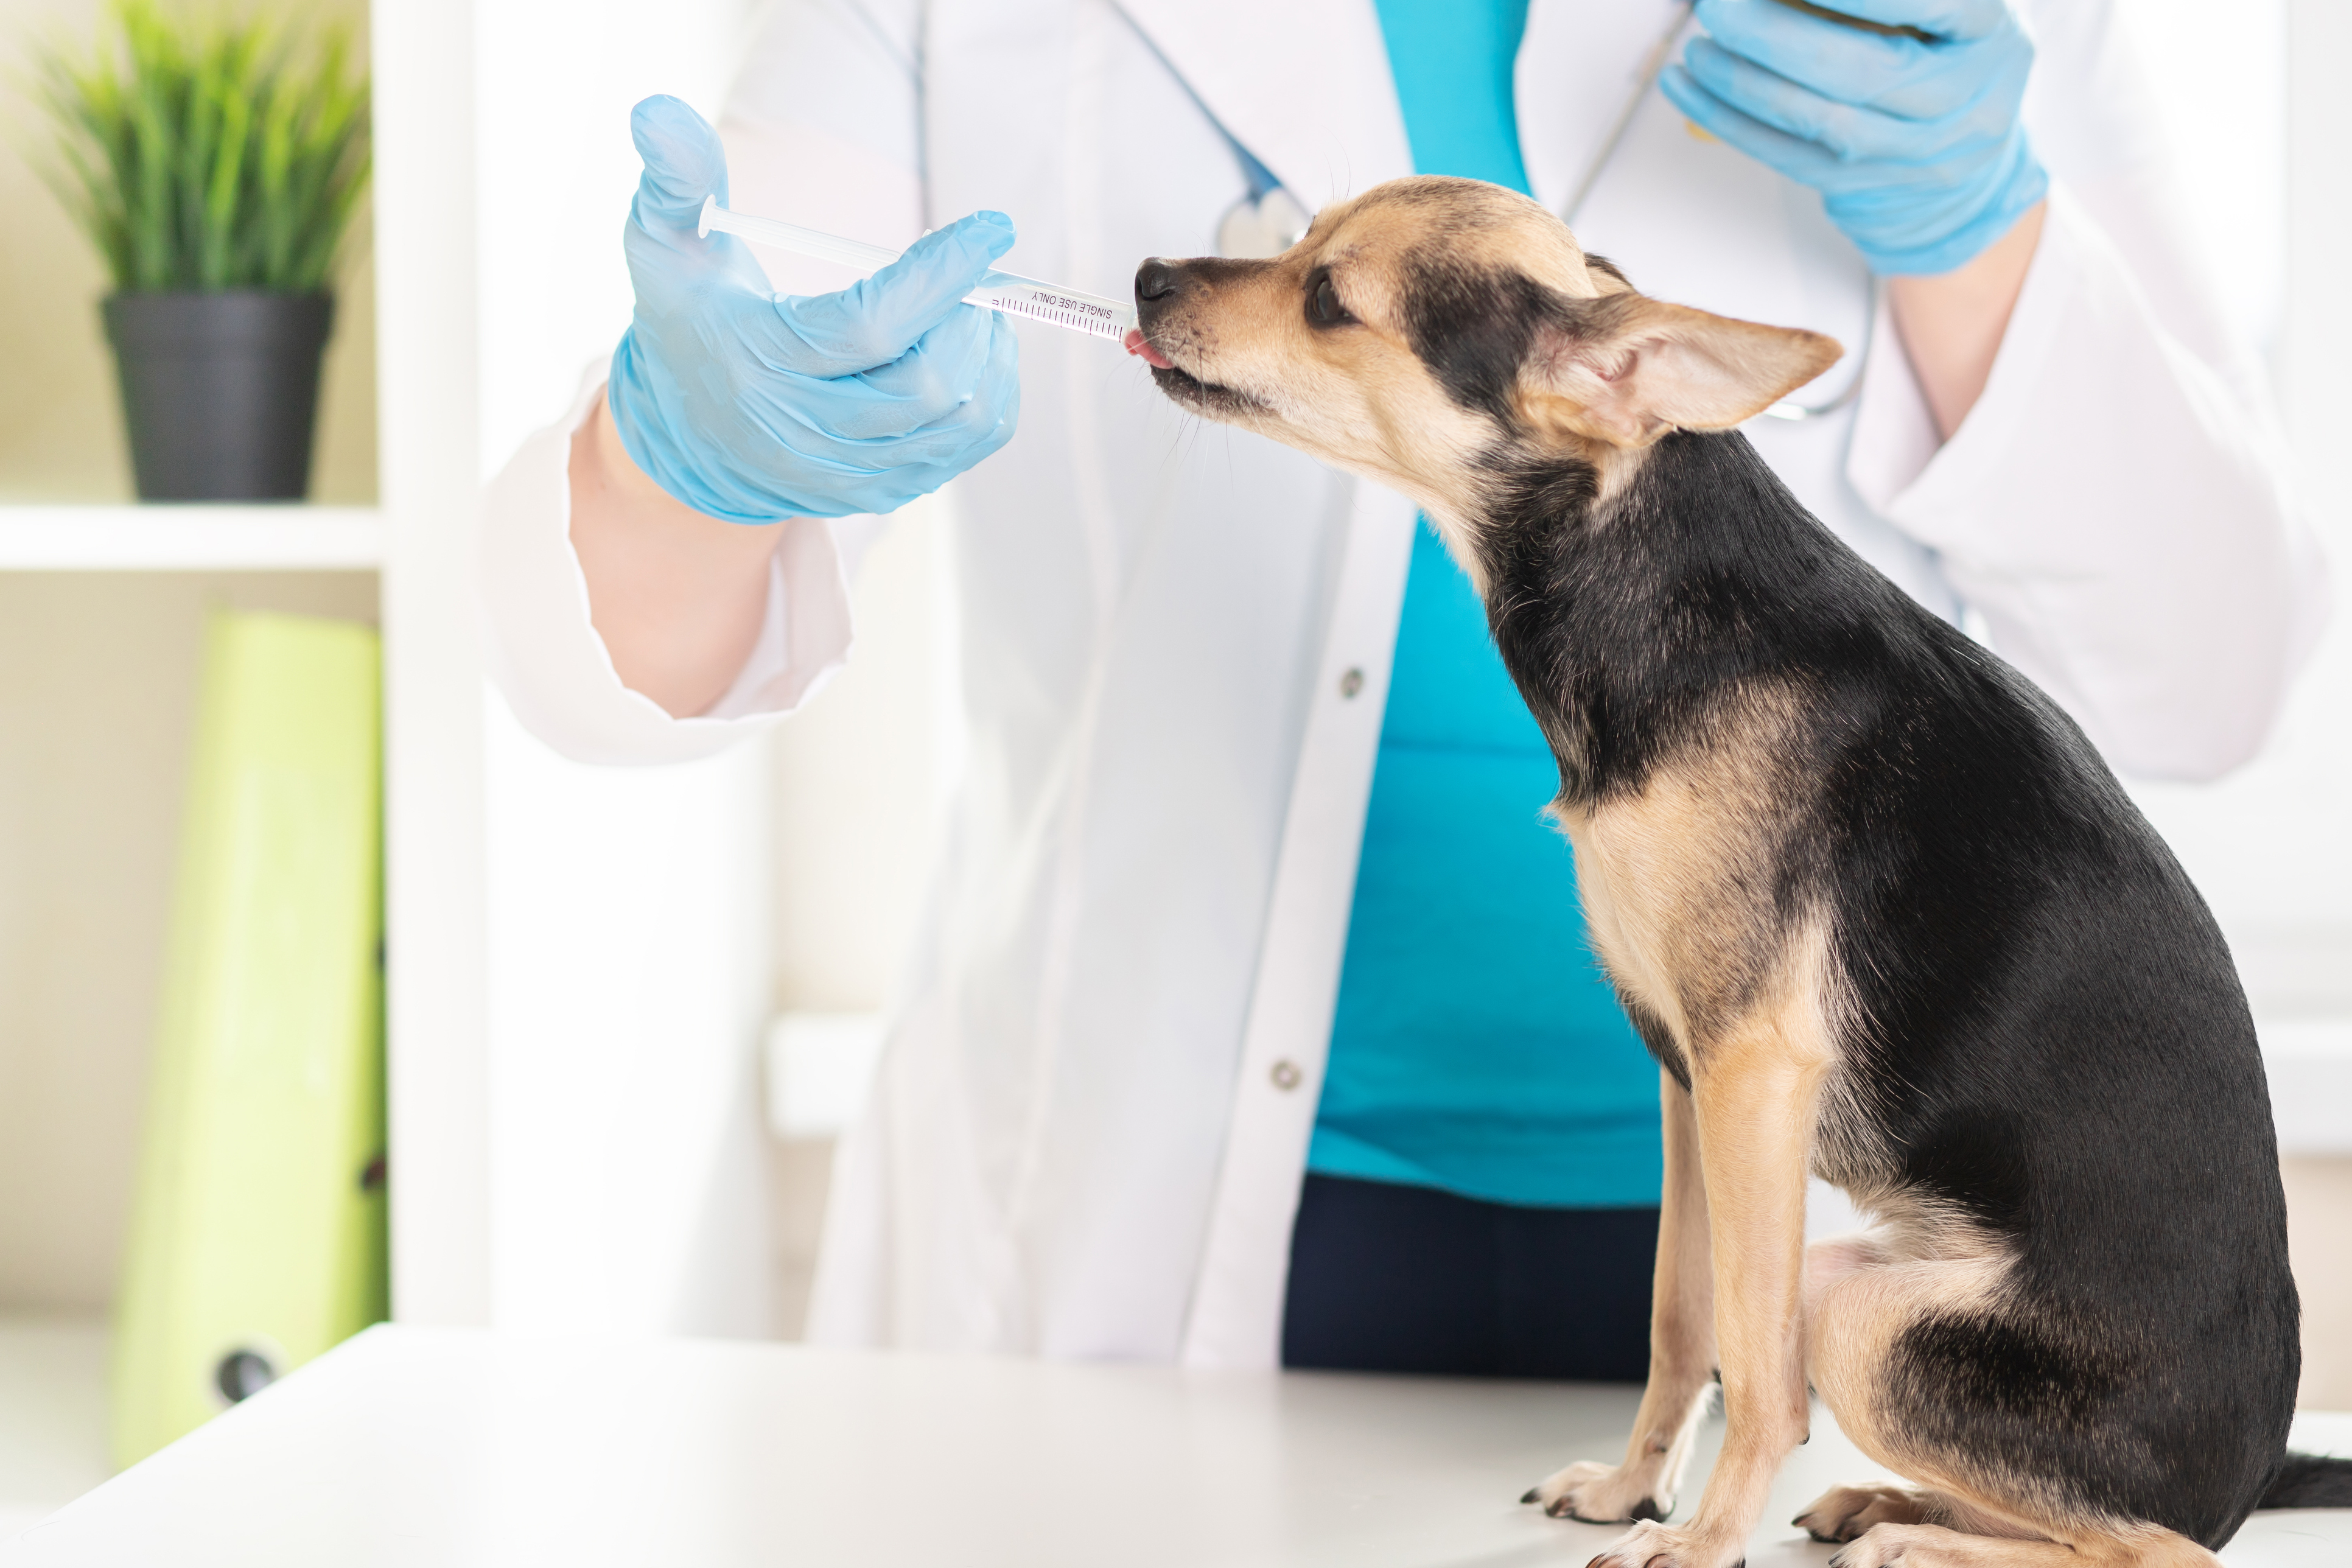 Trusted daily essentials for today's veterinarians | Clinician's Brief